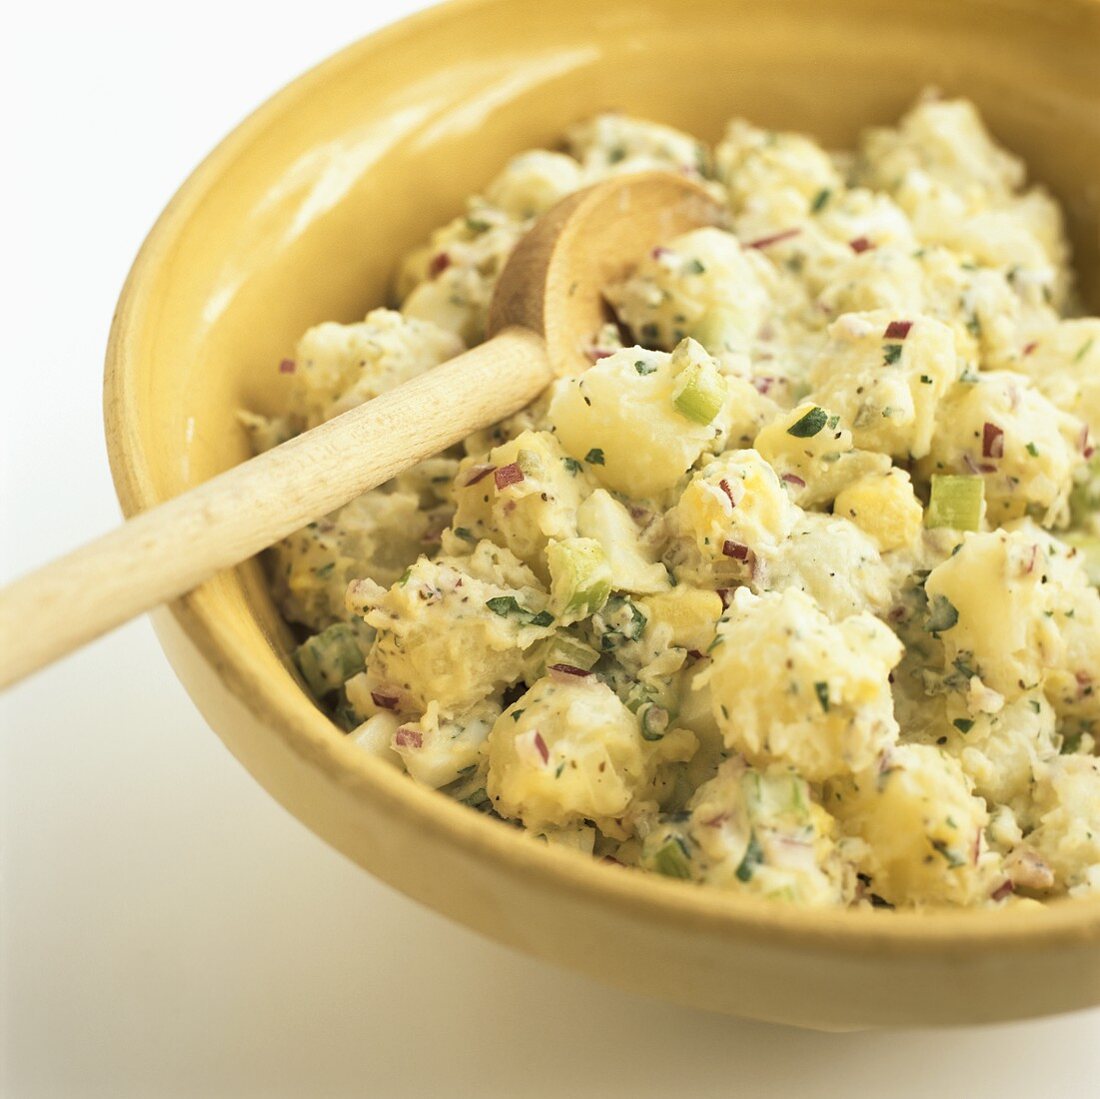 A Bowl of Potato Salad with a Wooden Spoon